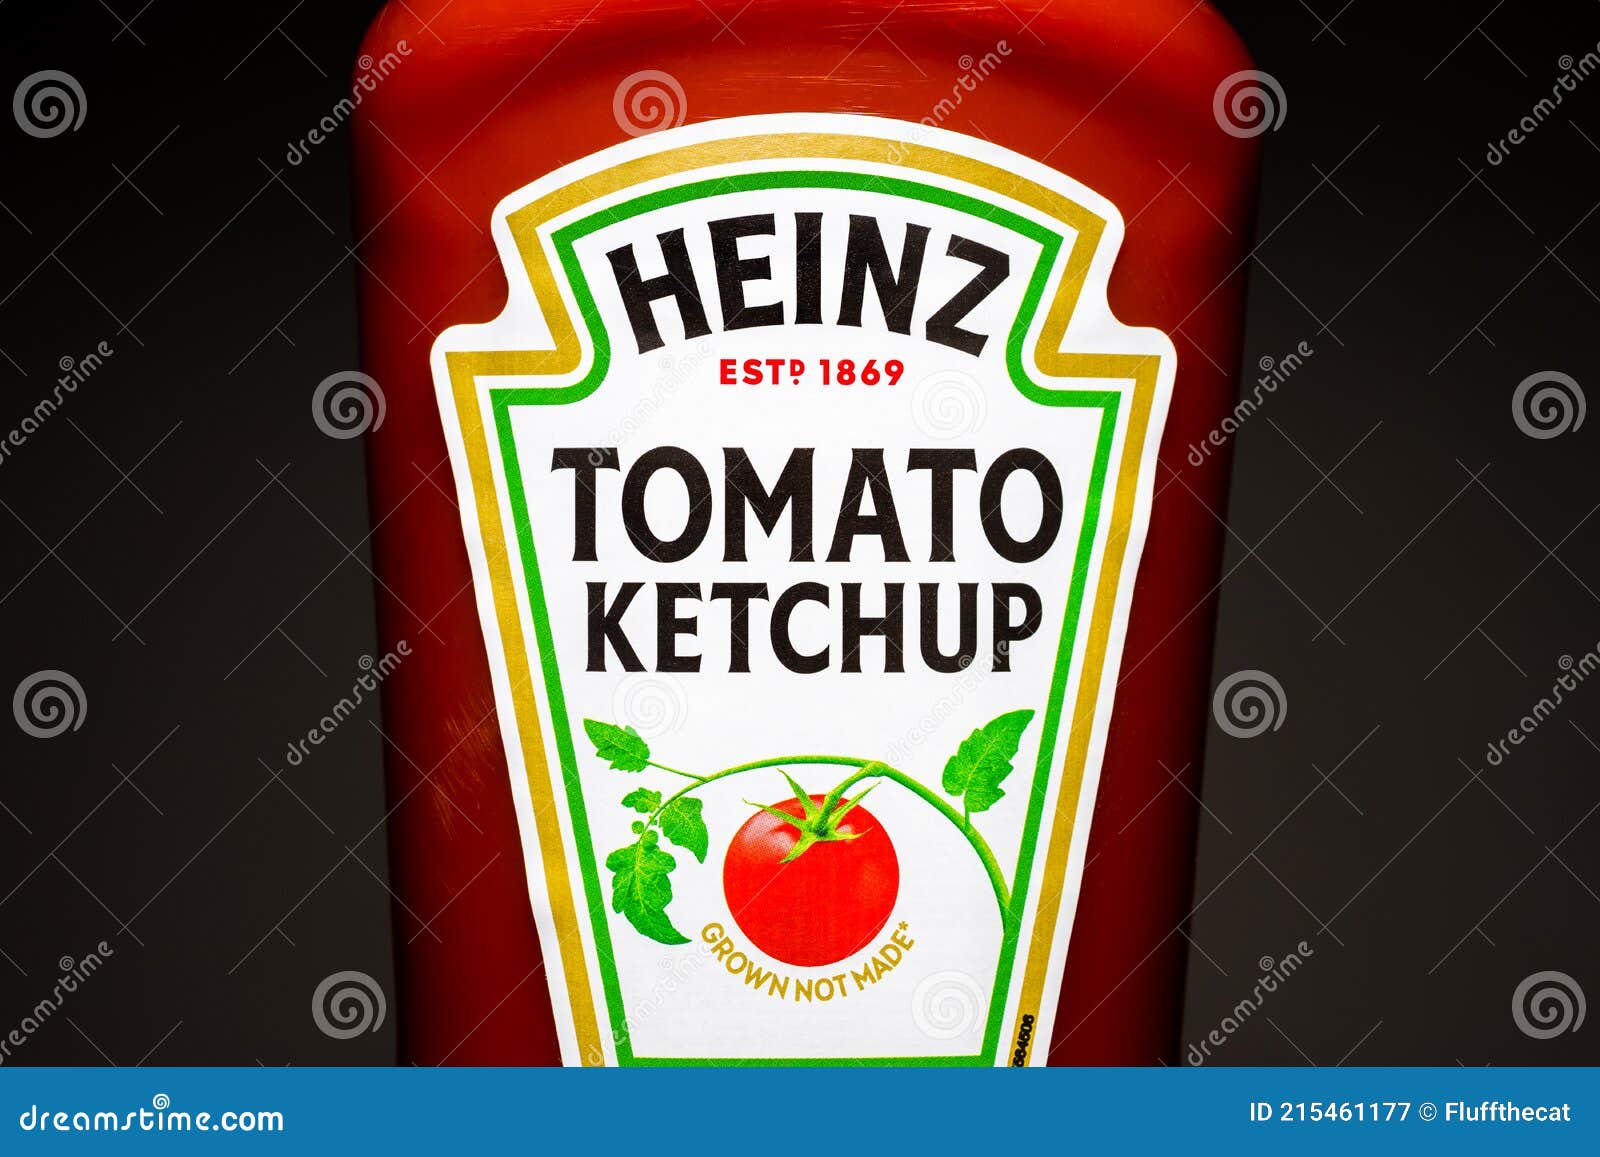 Heinz Tomato Ketchup Label Close-up. Editorial Photography - Image Within Heinz Label Template